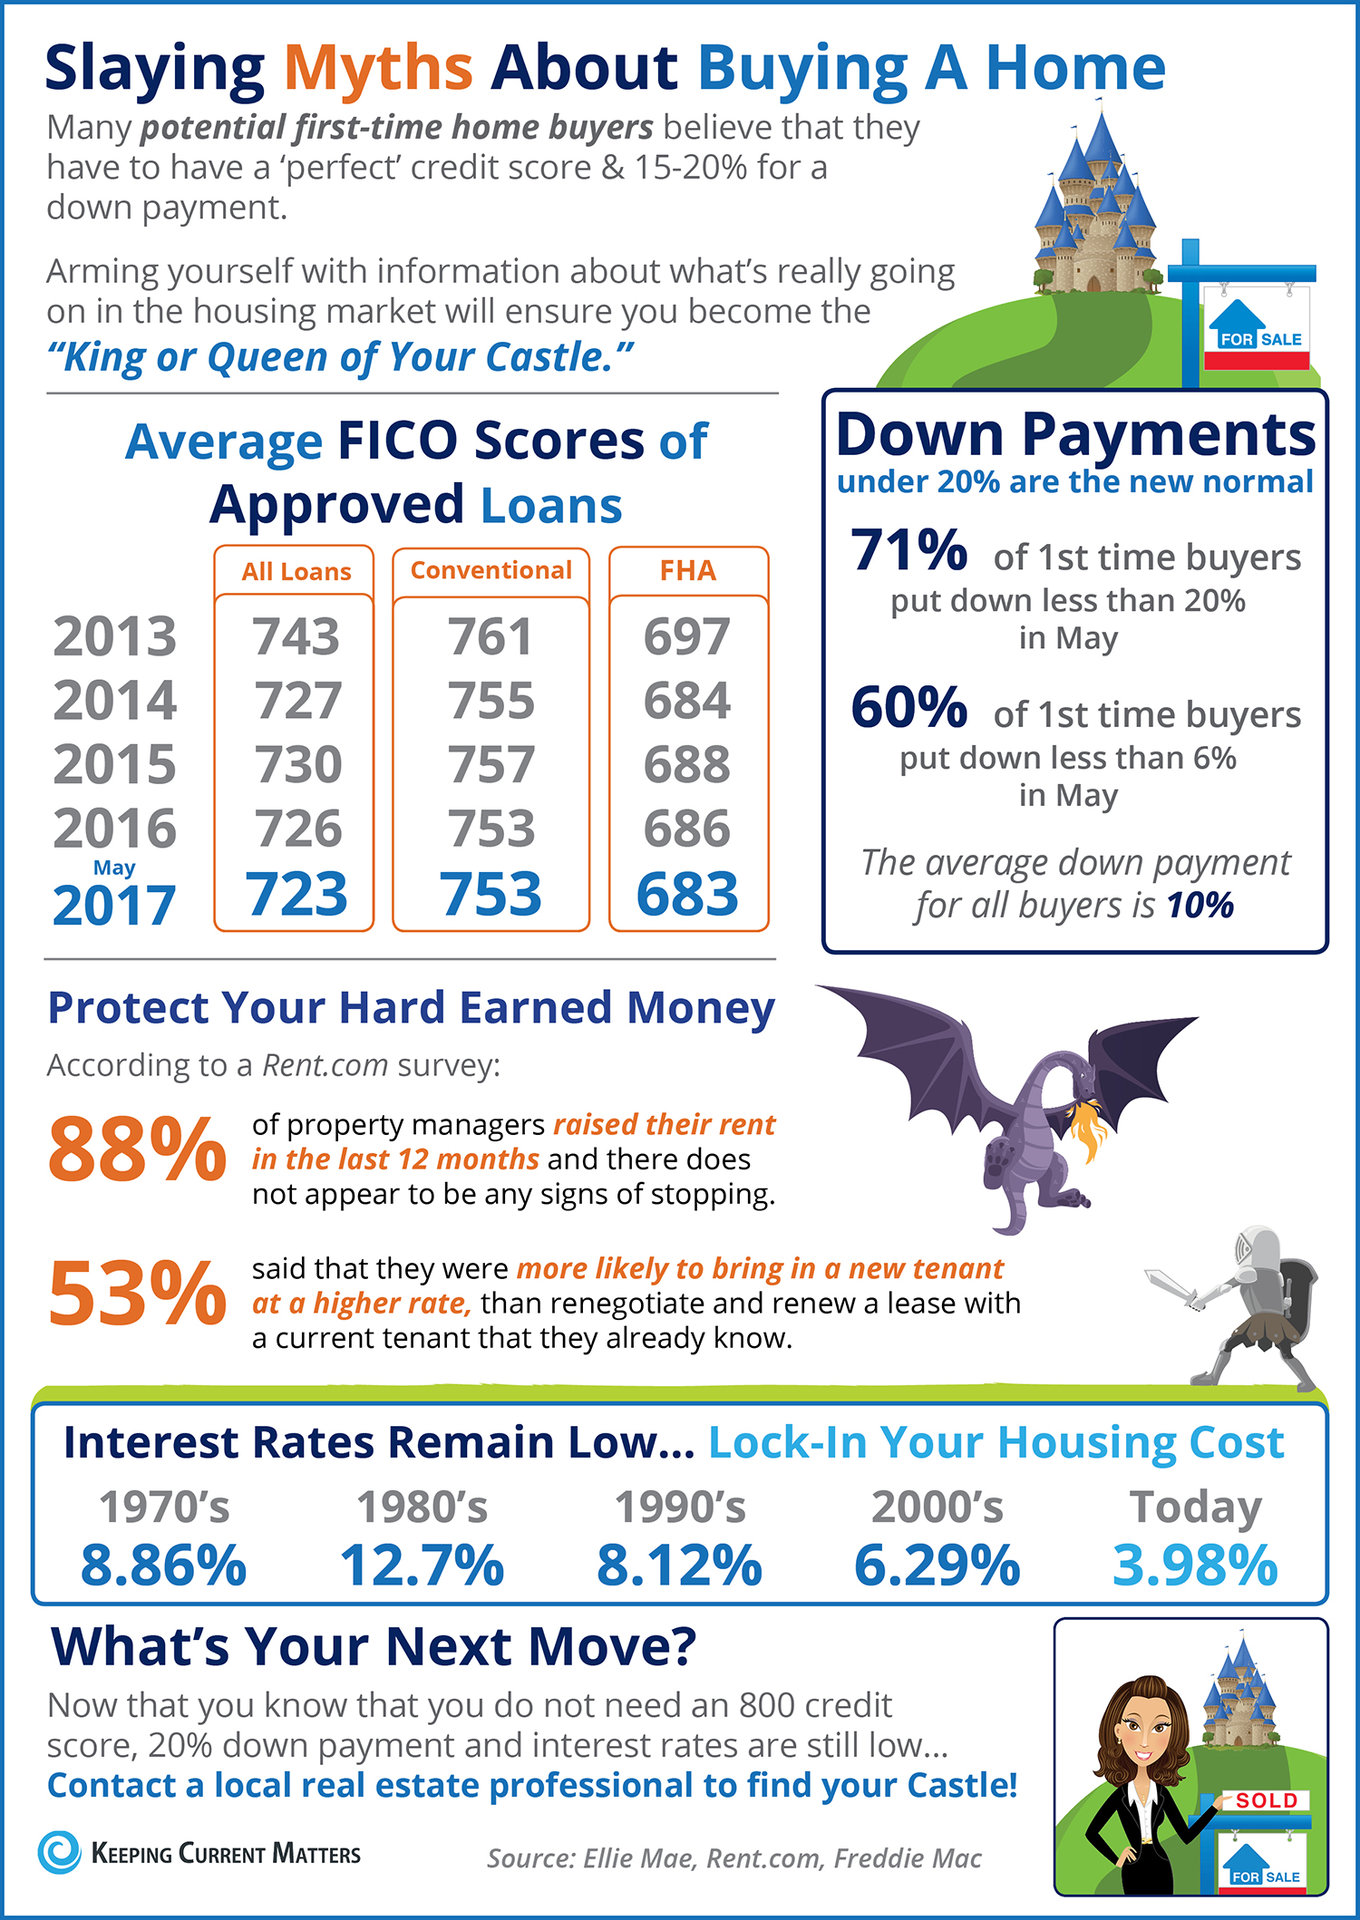 Home Buying Myths Slayed [INFOGRAPHIC] | Keeping Current Matters